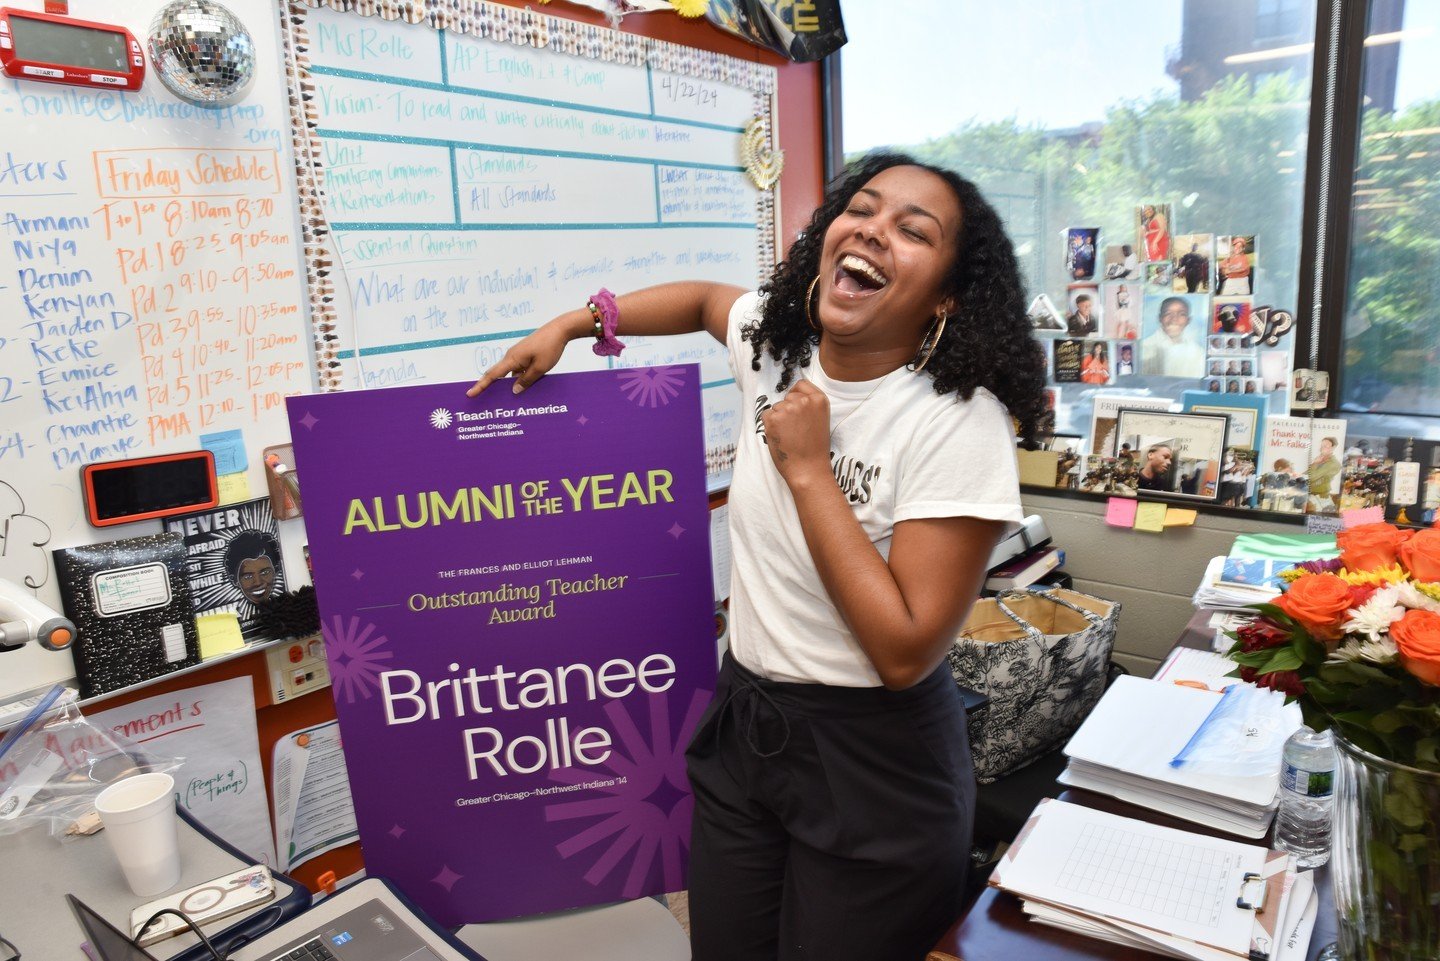 Brittanee Rolle ('14 Greater Chicago&ndash;Northwest Indiana) is winner of the 2024 Frances and Elliot Lehman Alumni of the Year Award, which honors outstanding culturally responsive teaching. Brittanee&rsquo;s commitment to her students goes beyond 